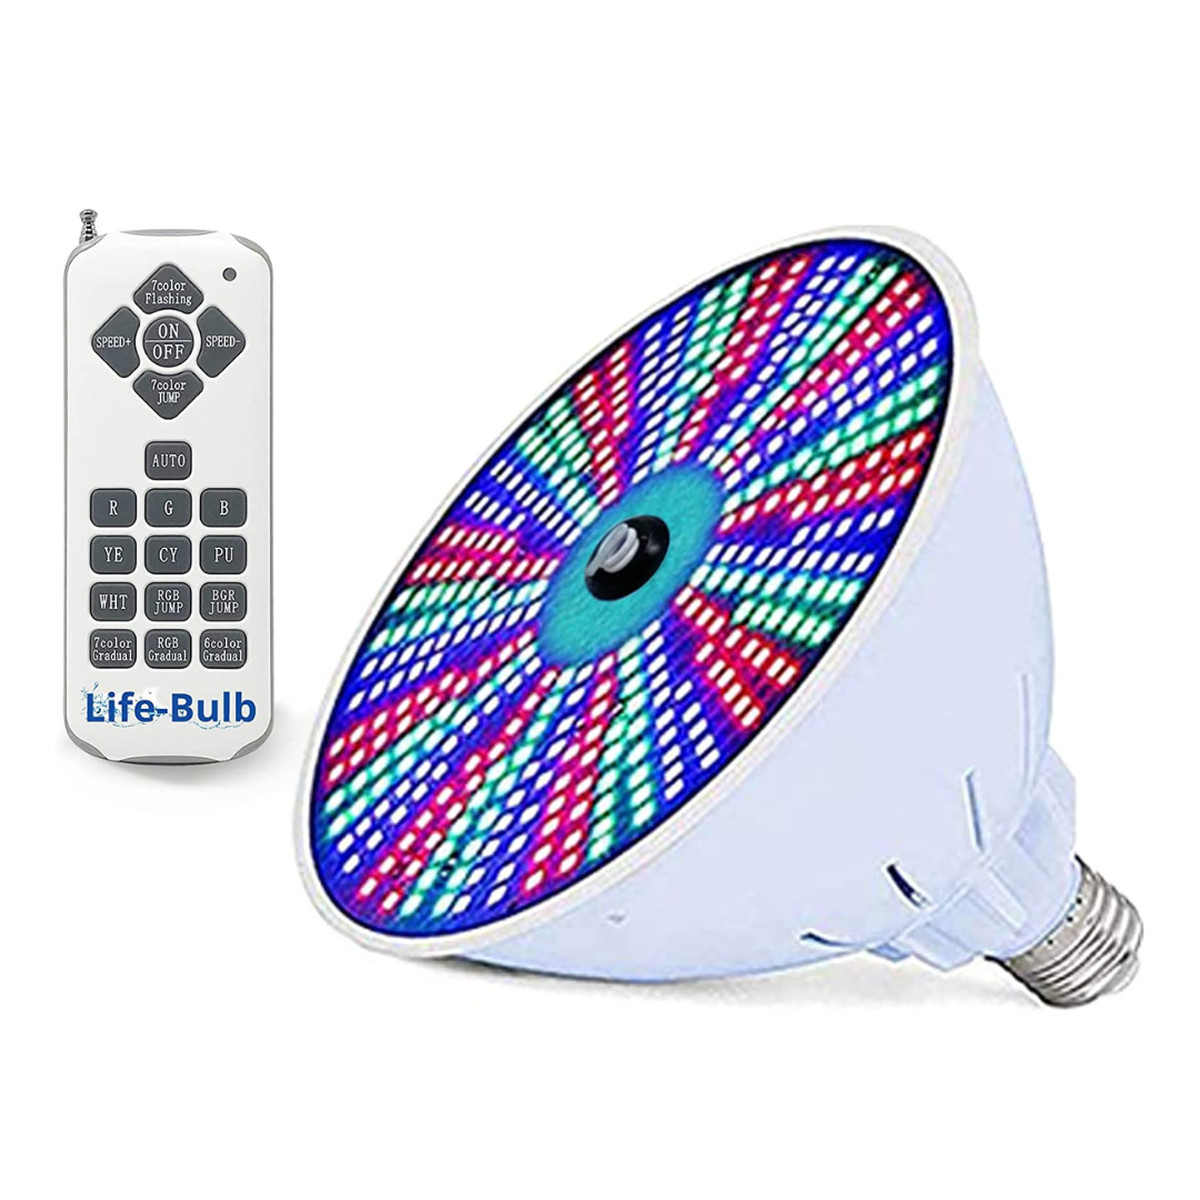 Life-Bulb LED Color Pool Light Bulb with remote control.